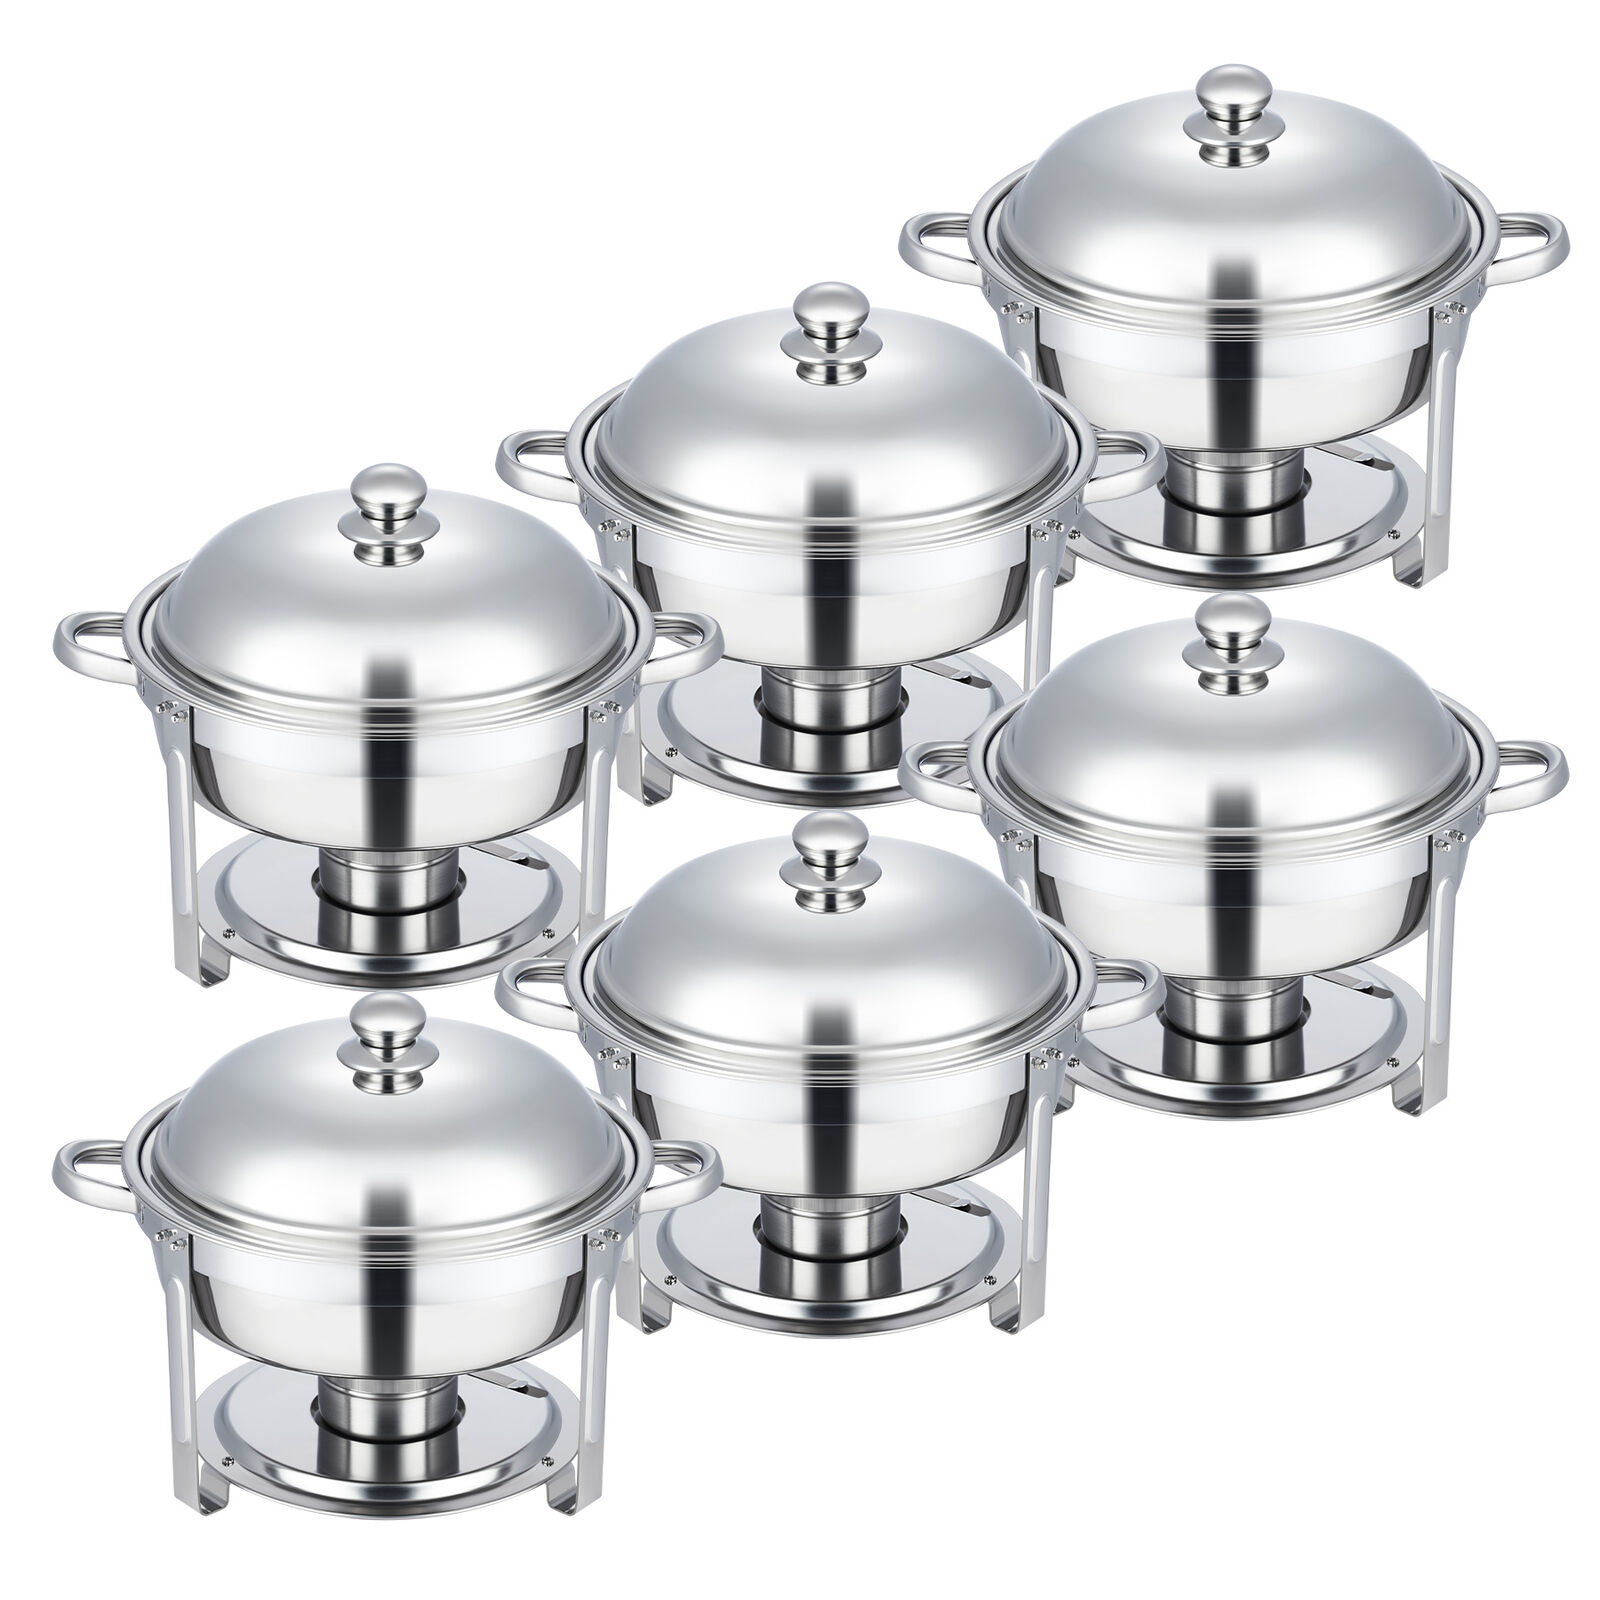 6 Pack 5.3Qt Stainless Steel Chafer Chafing Dish Sets Bain Marie Food Warmer